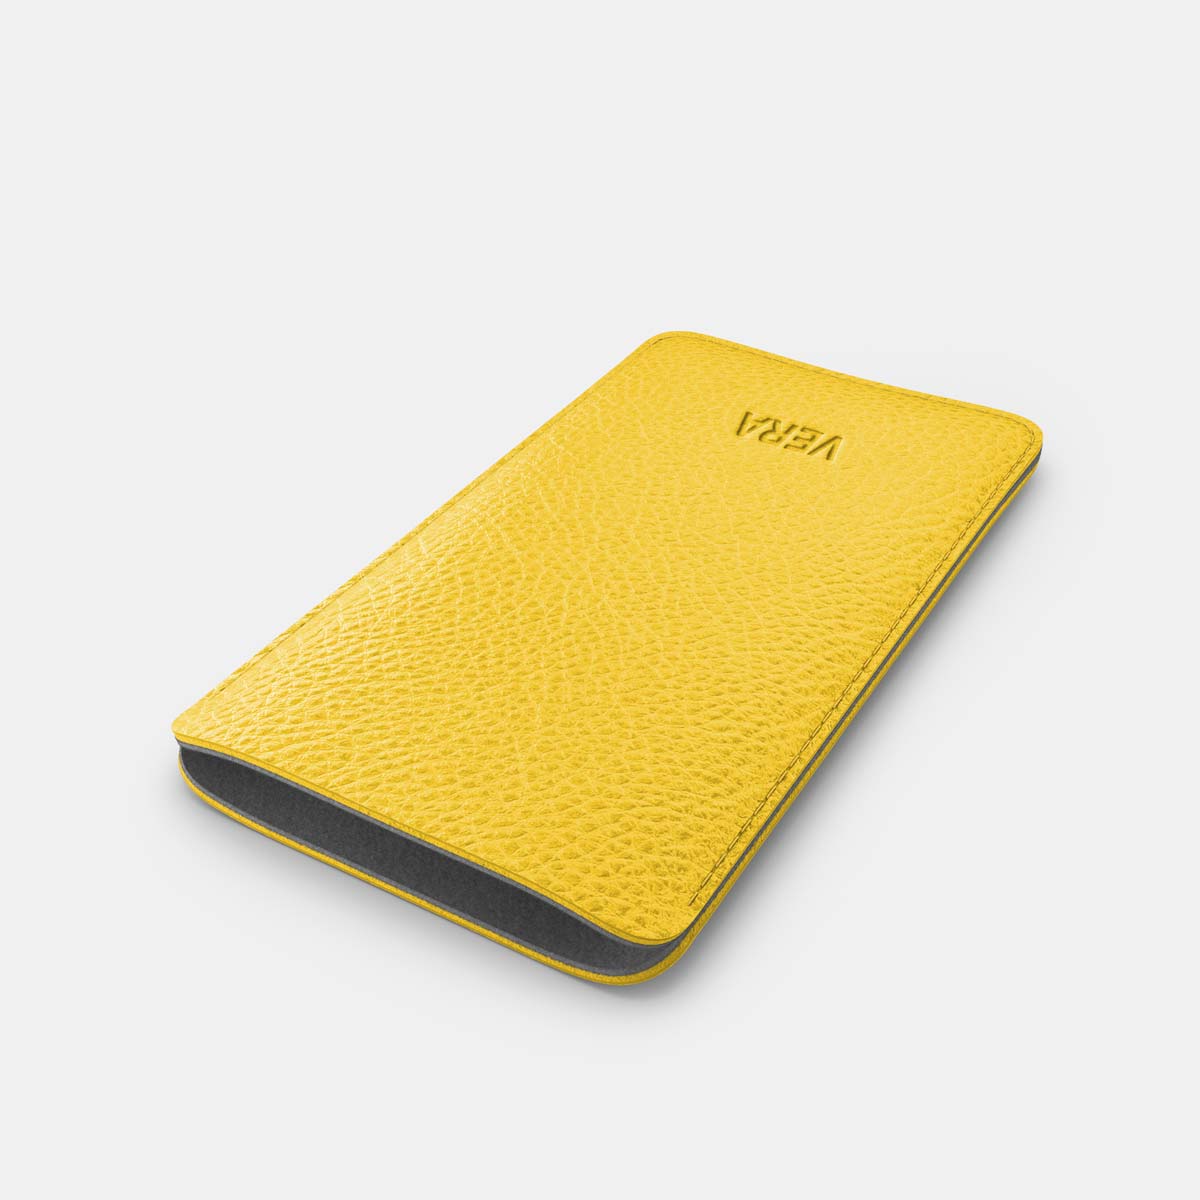 Leather iPhone 12 Pro Max Sleeve - Yellow and Grey